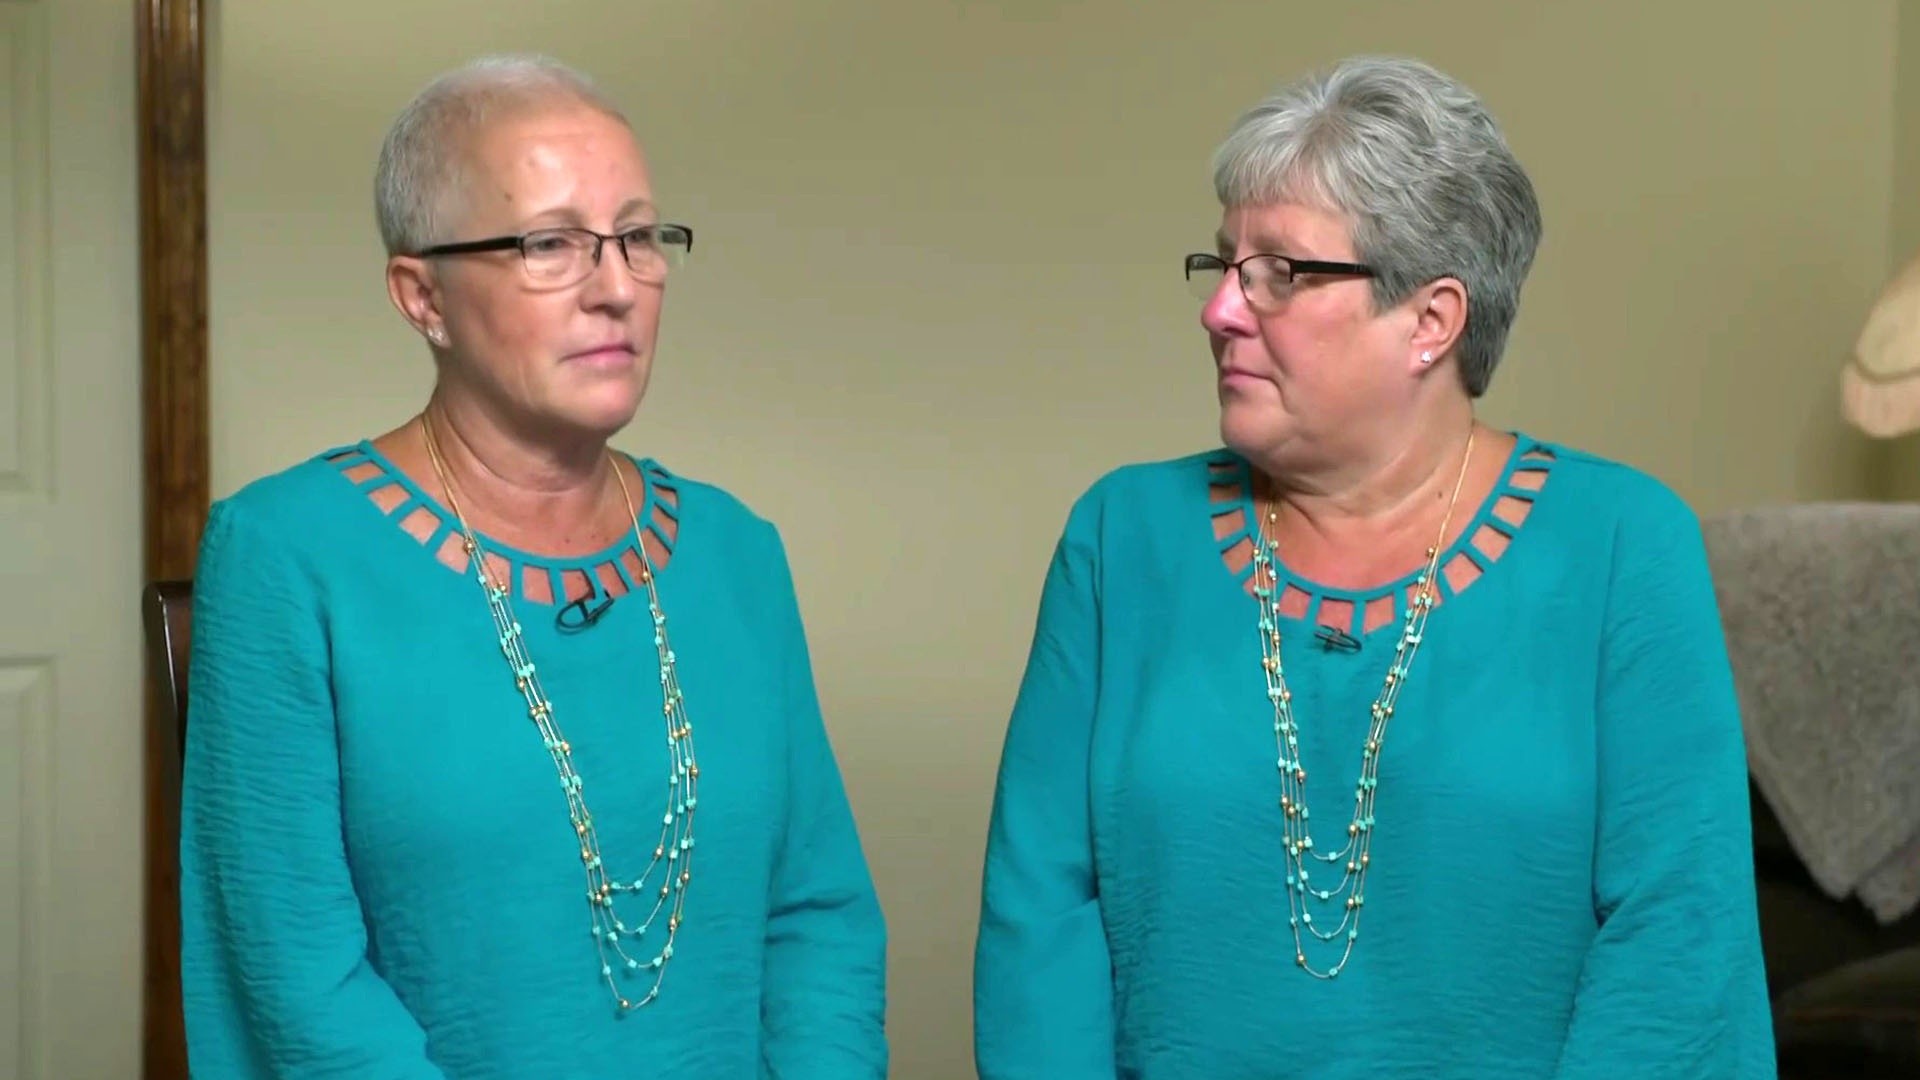 Ovarian cancer: Identical twins speak out to raise awareness